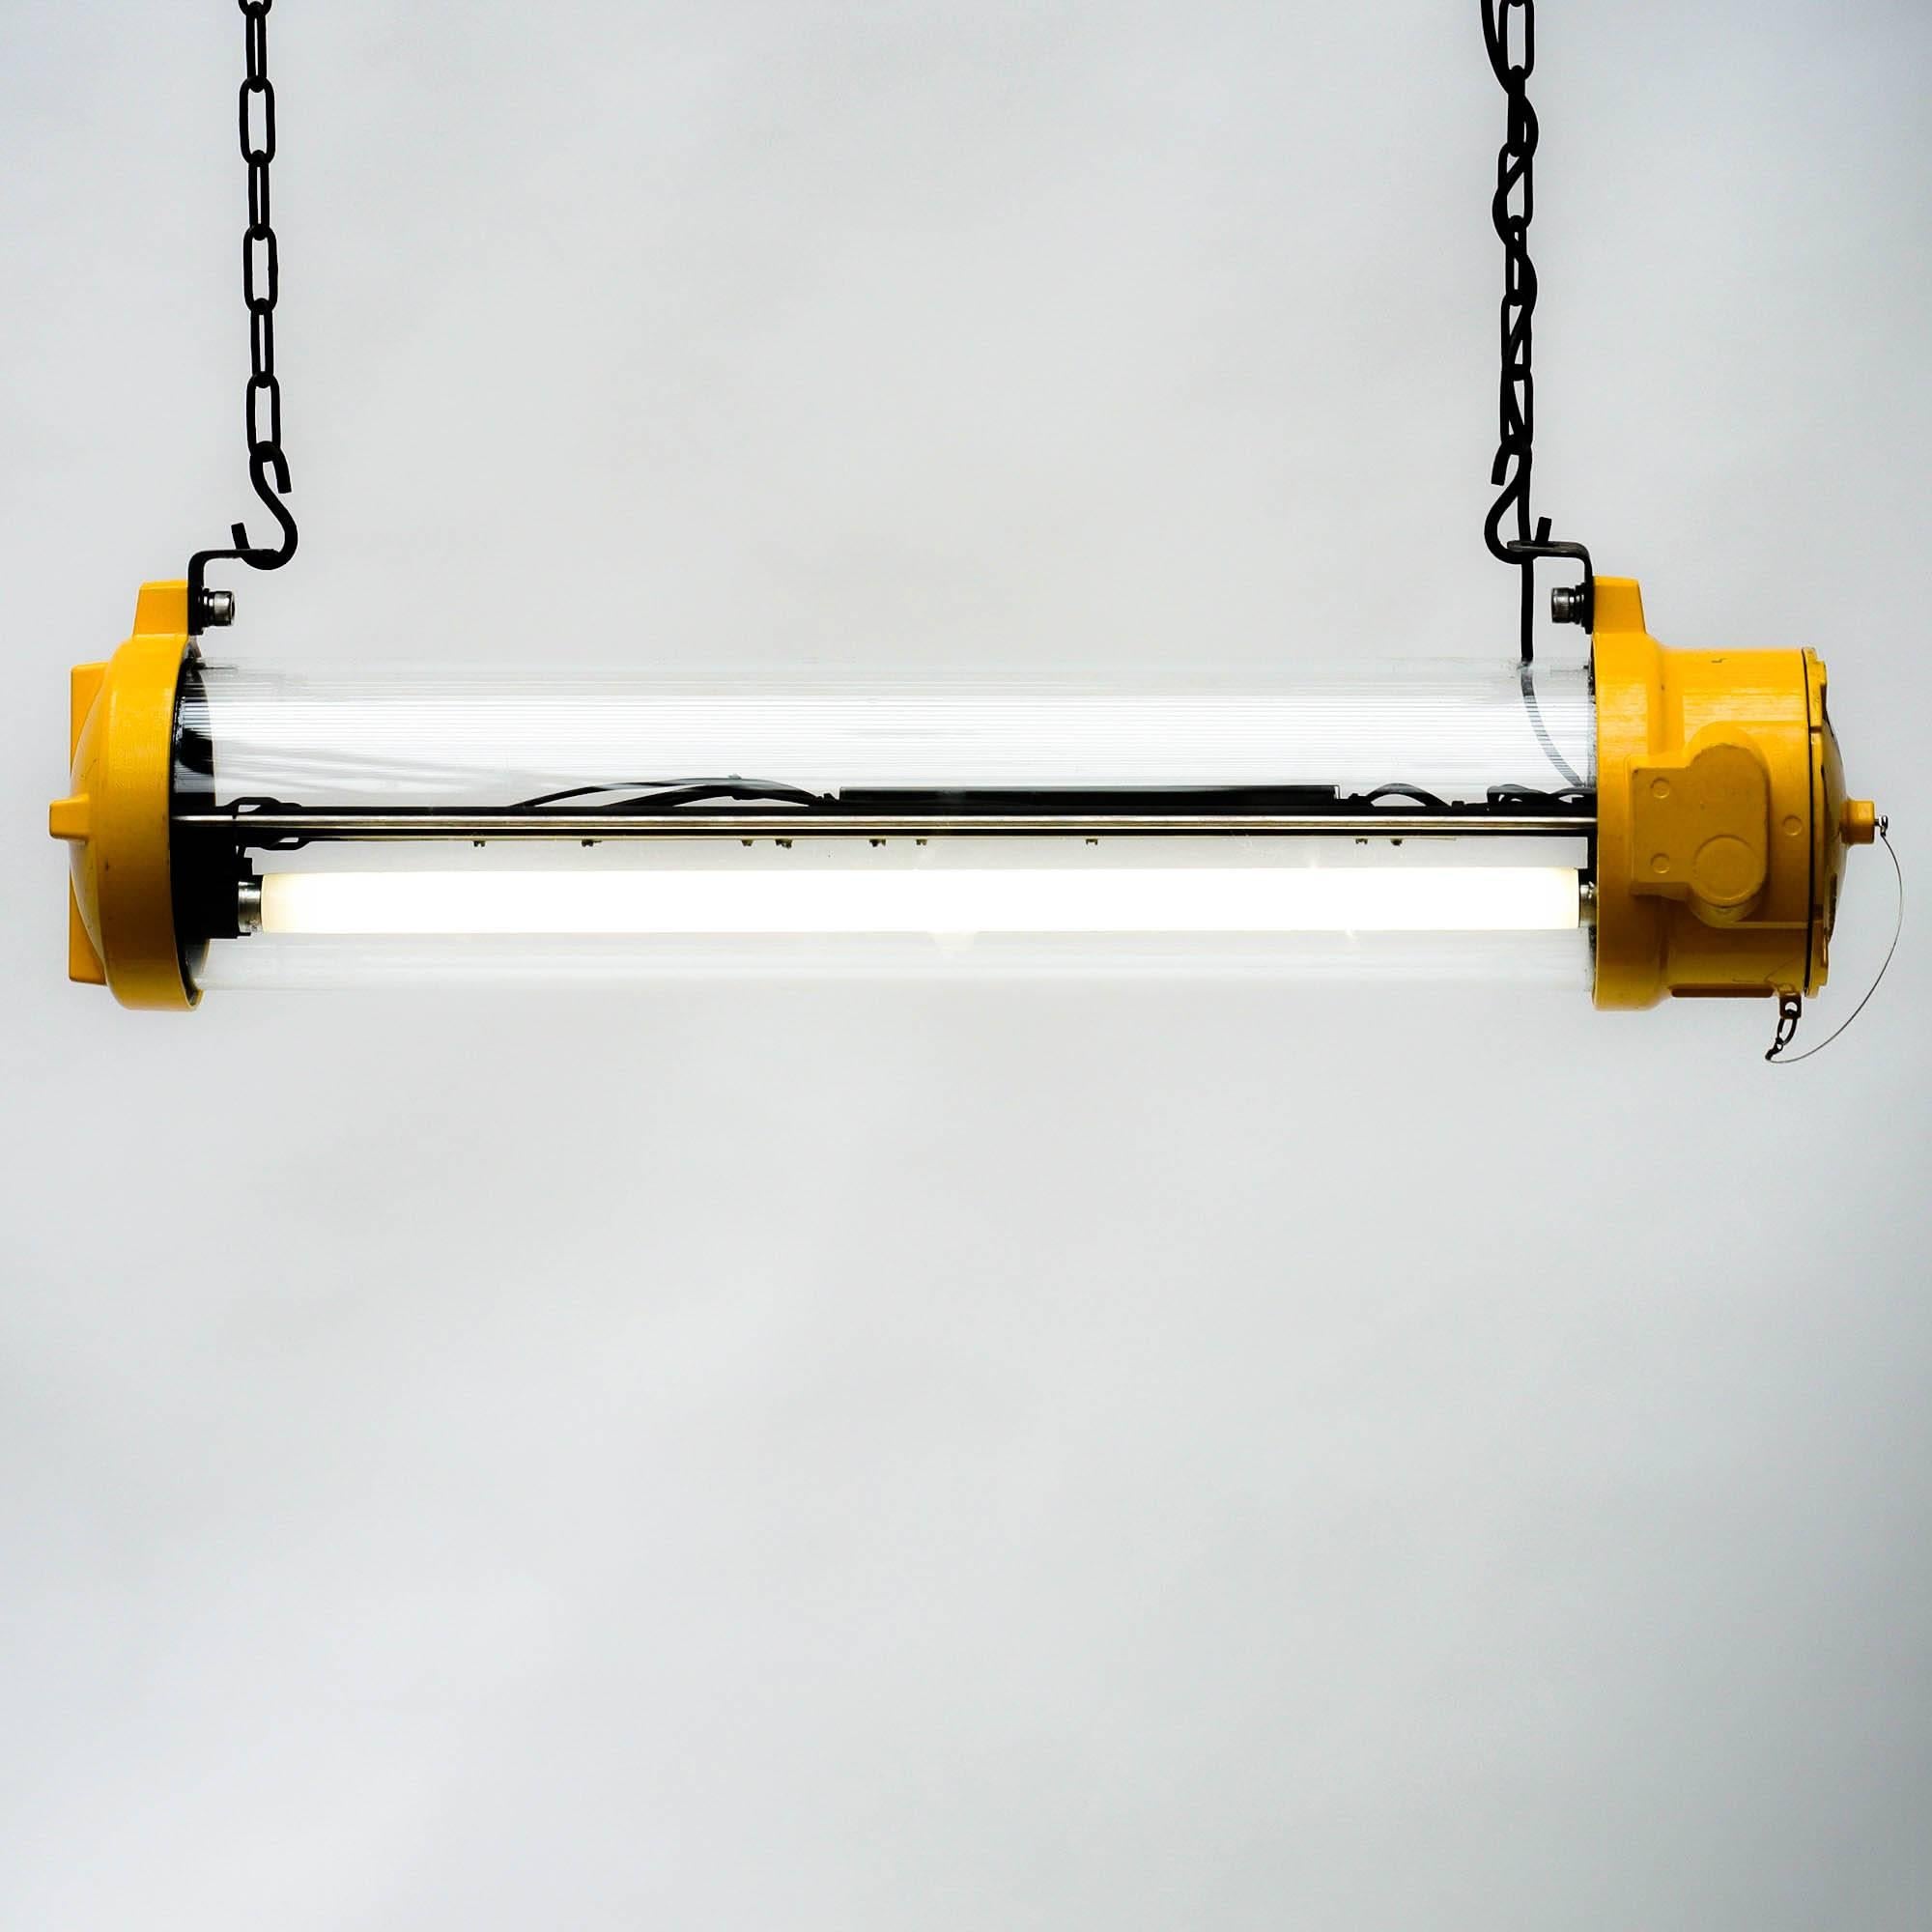 Painted Anti-Deflagration Fluorescent Lamp Fully Restored, circa 1970